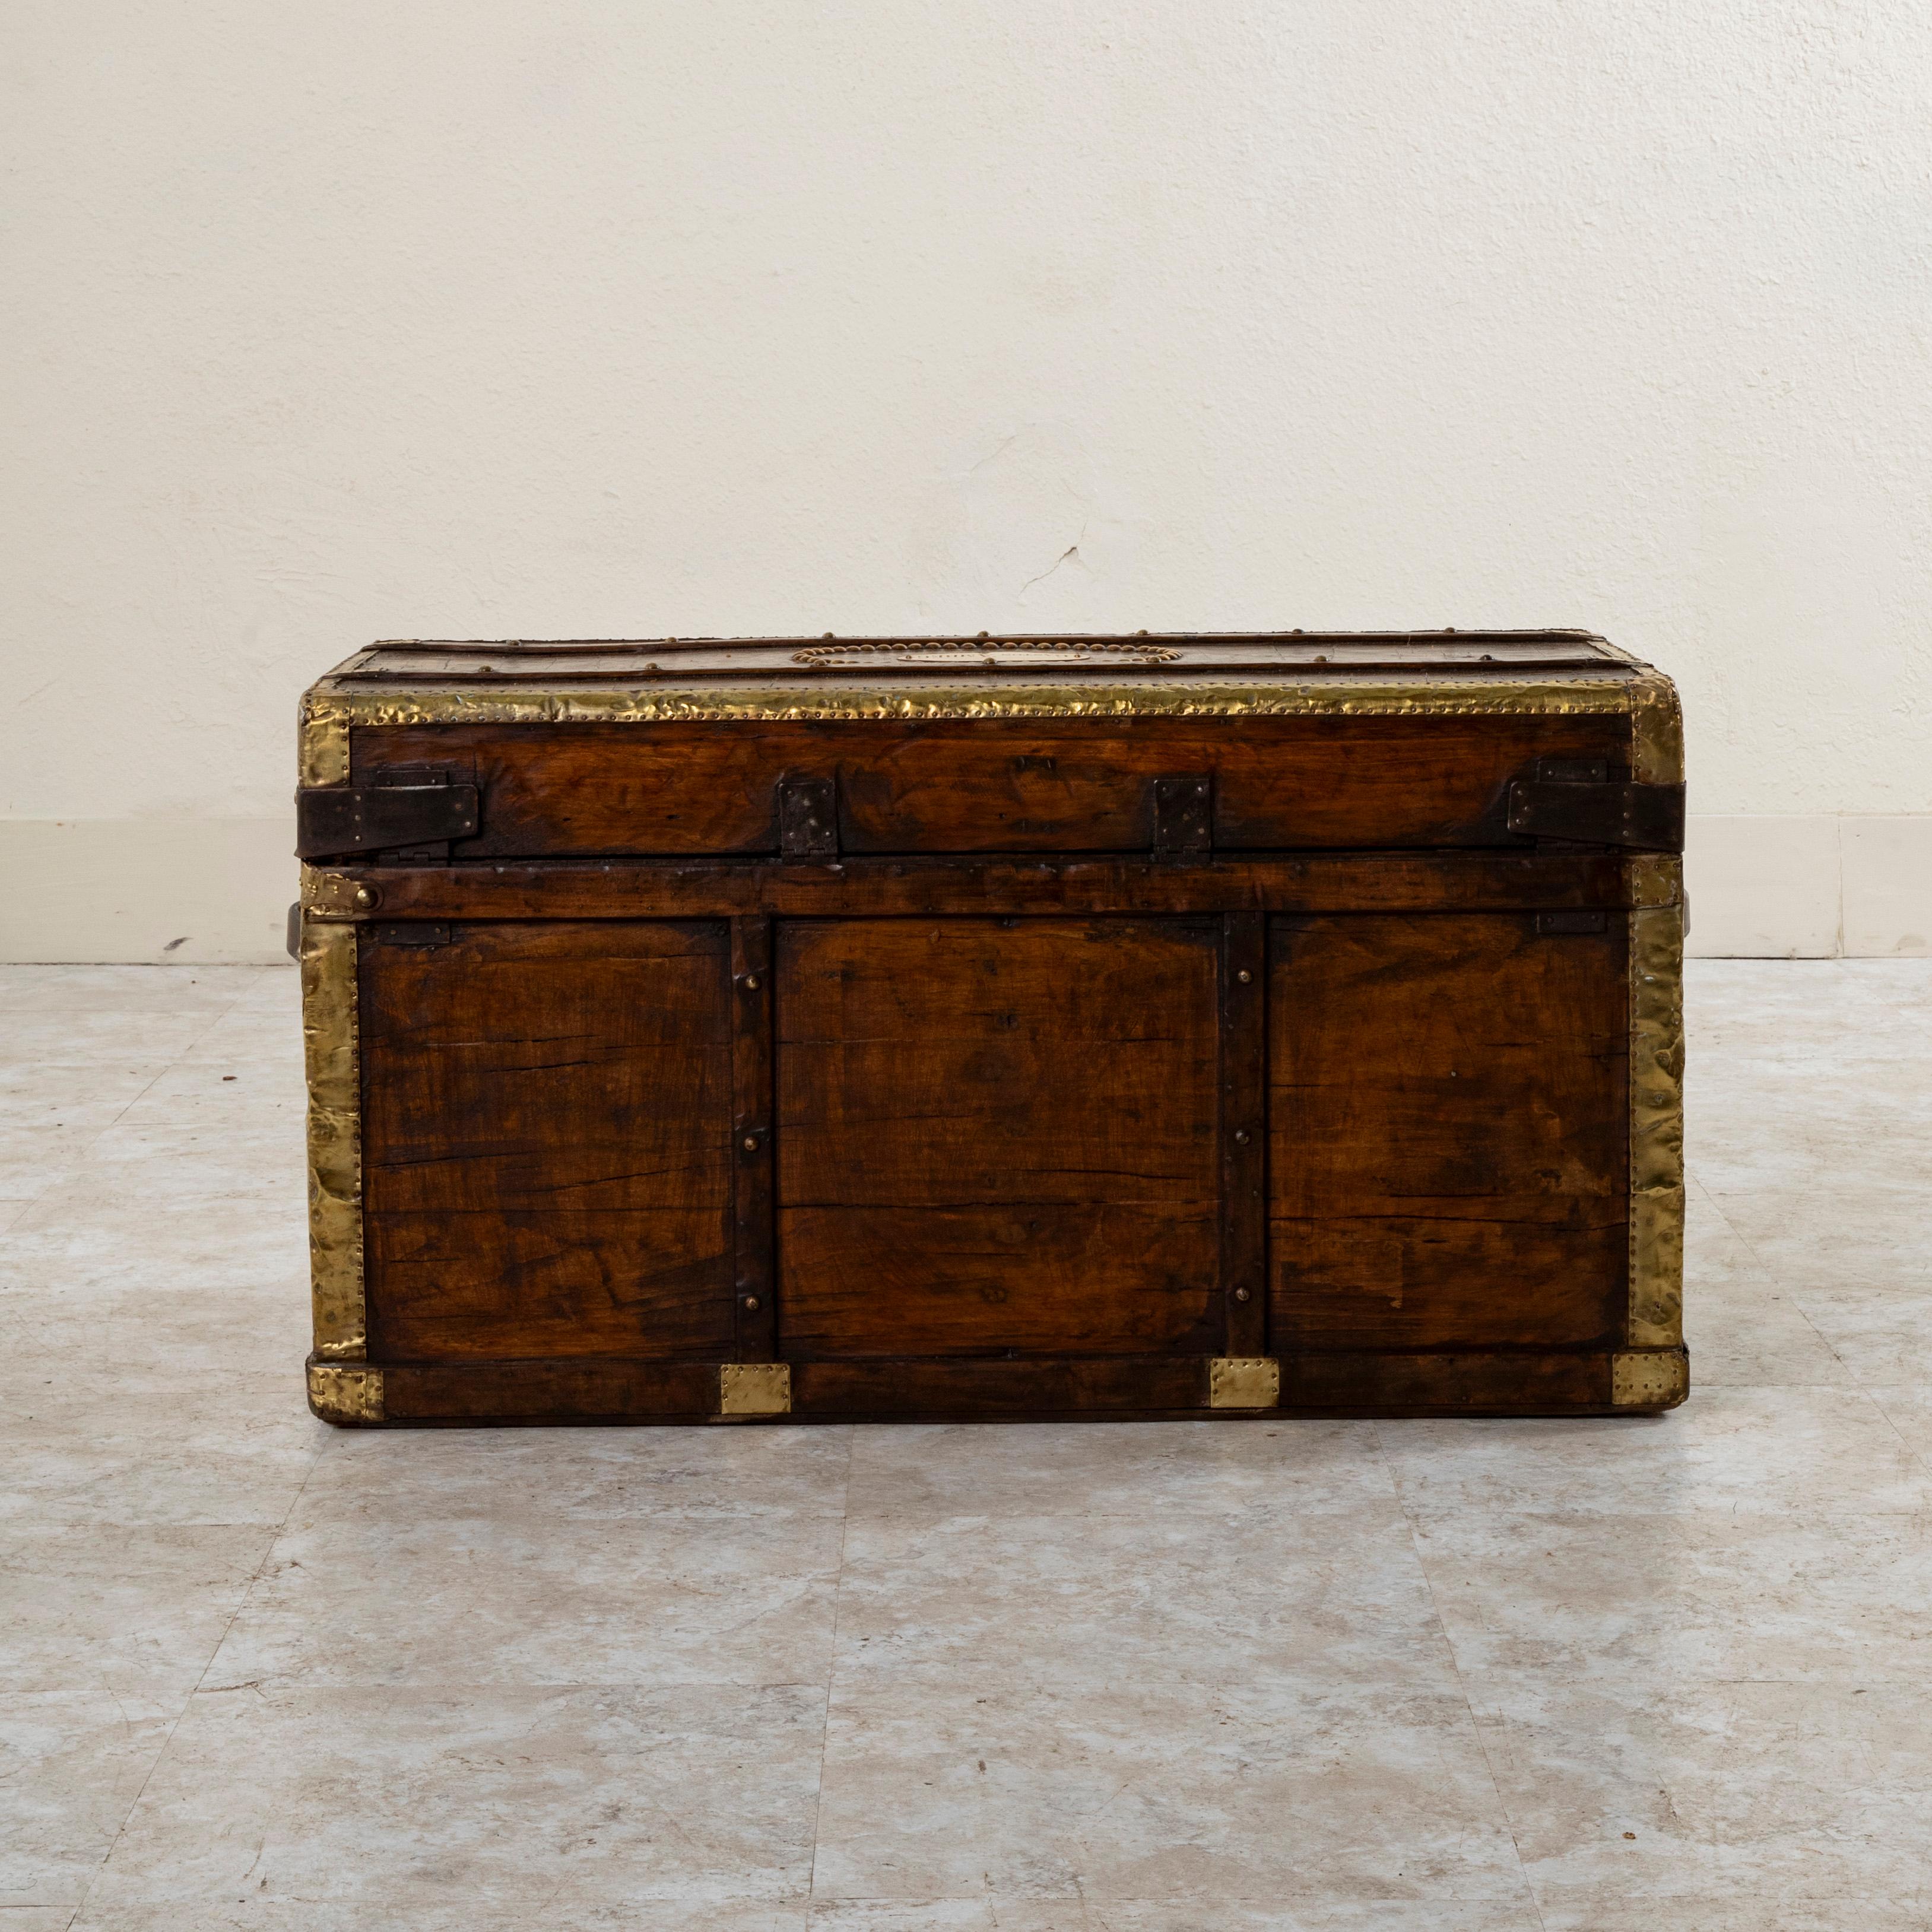 19th Century Swiss Wooden Steam Trunk with Runners, Brass, Iron, Leather Details, circa 1880